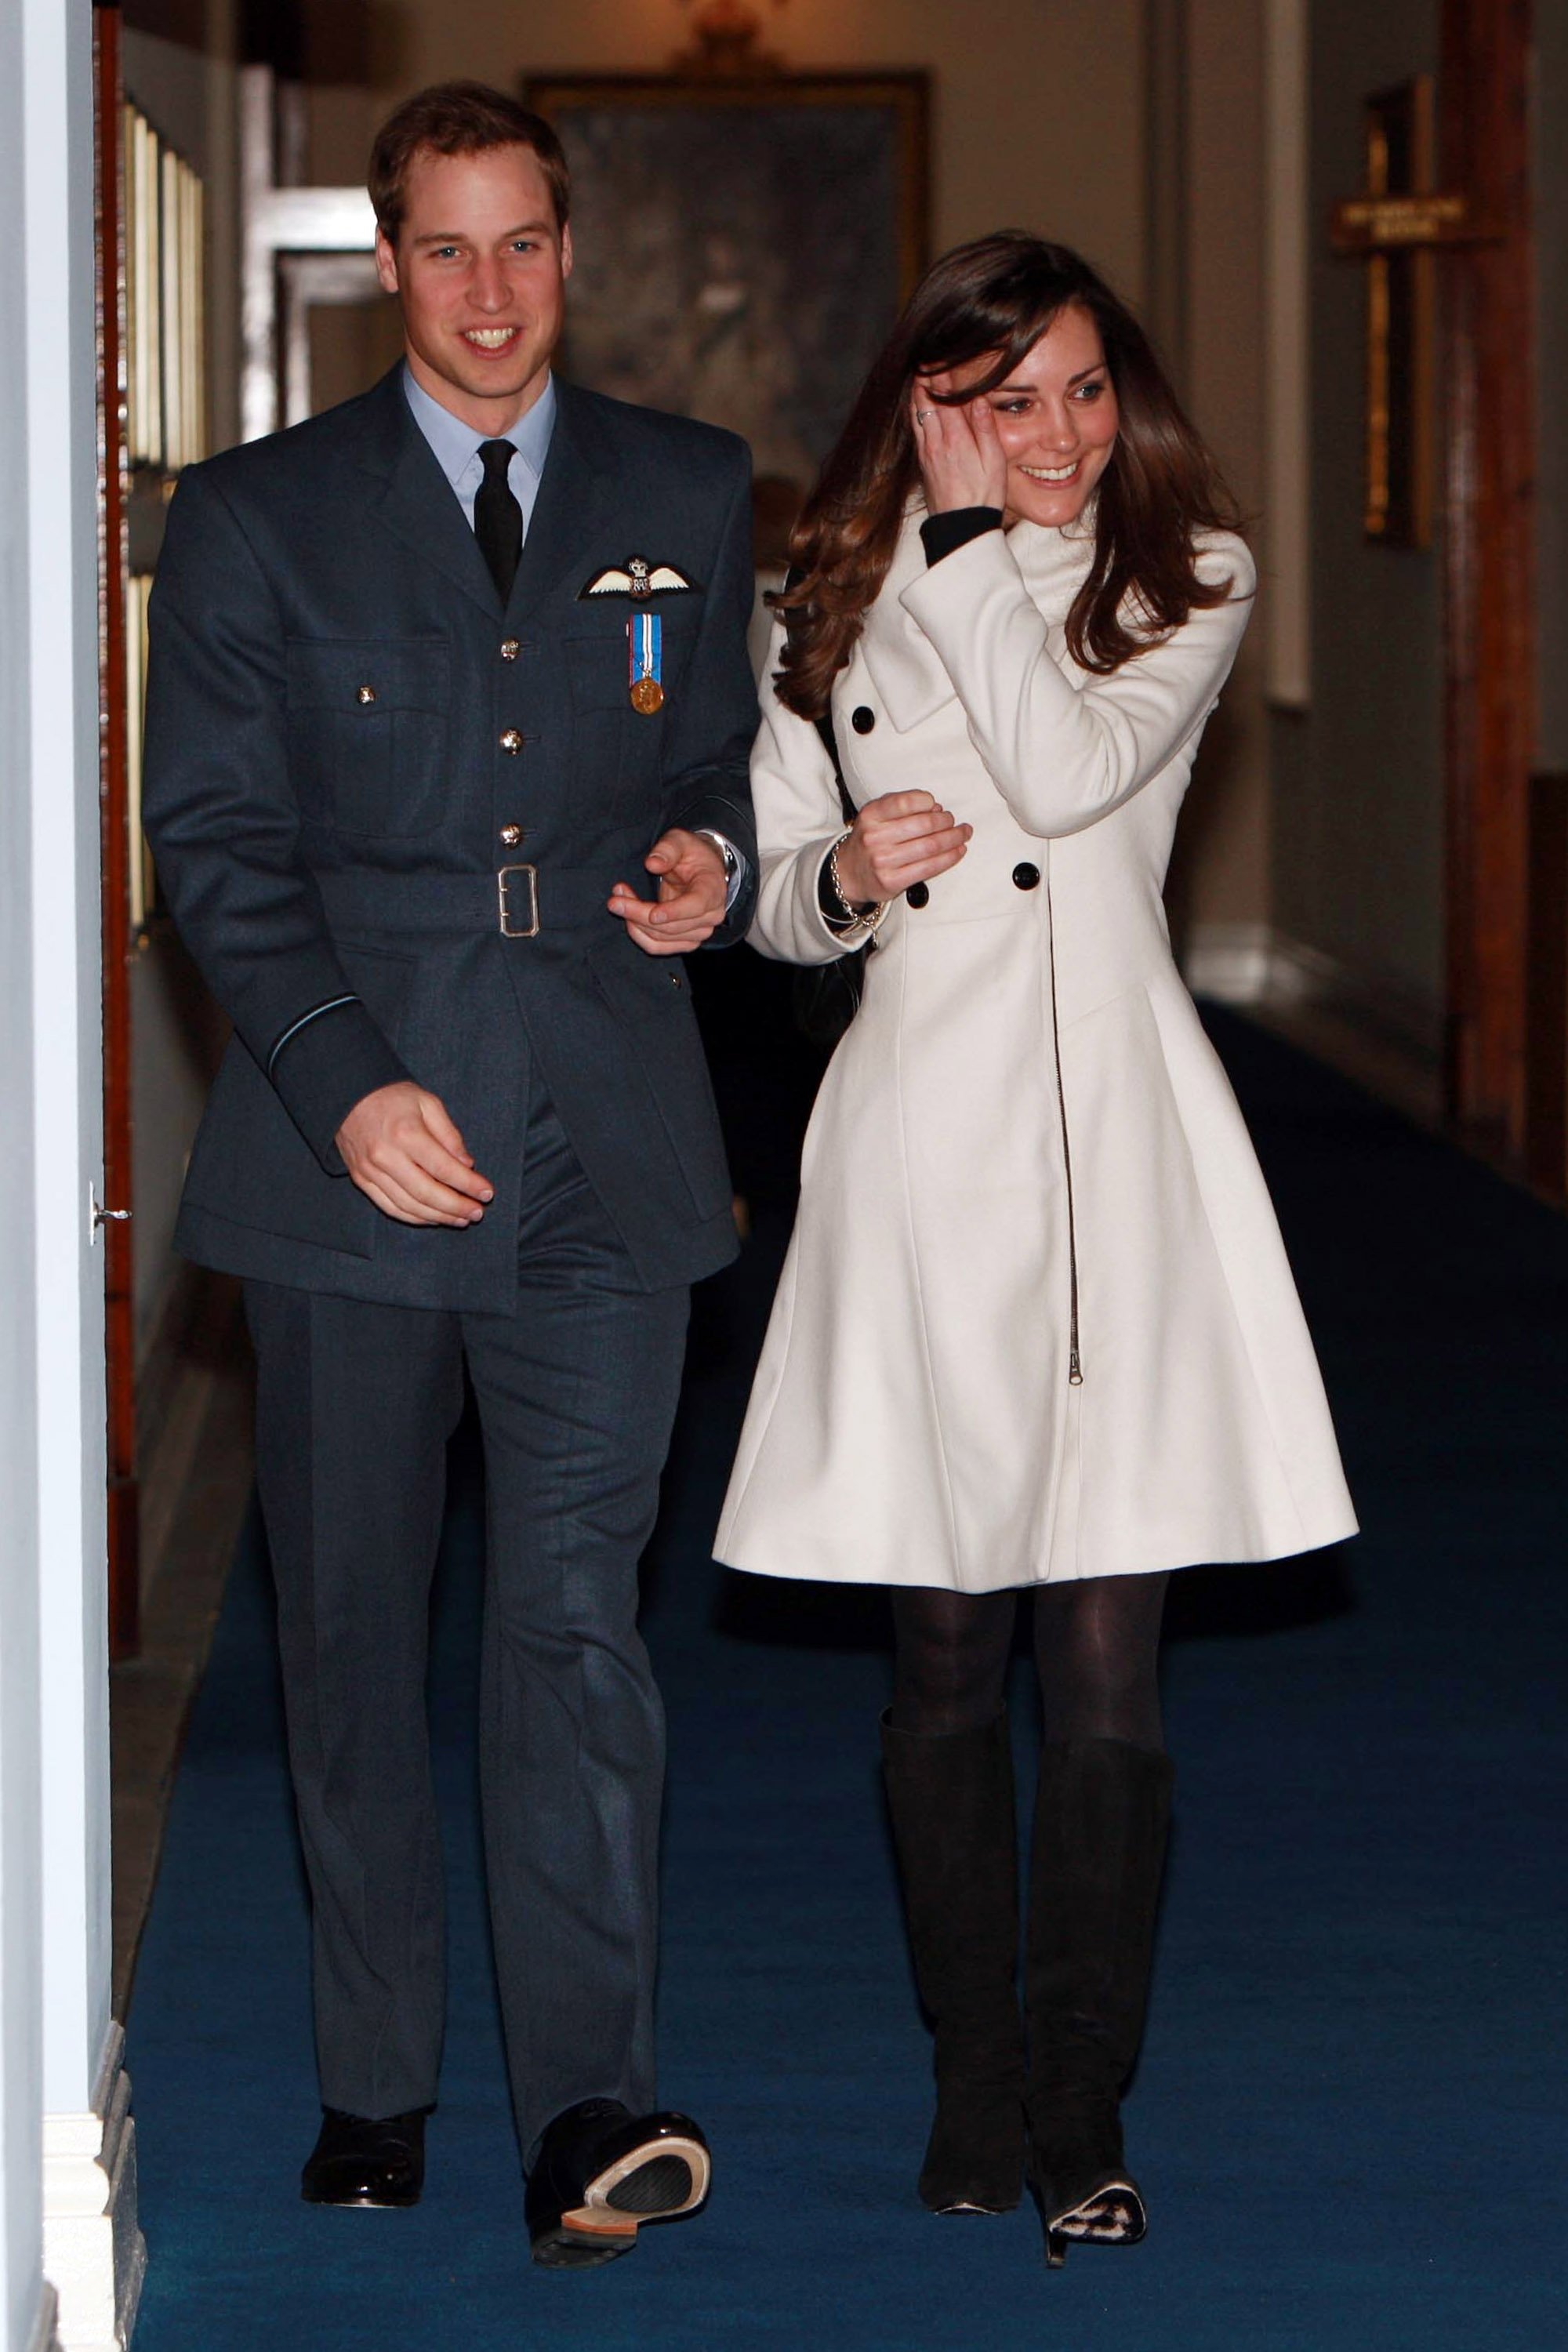 Prince William with his girlfriend Kate Middleton after his graduation ceremony at RAF Cranwell on April 11, 2008, in Cranwell, England | Source: Getty Images